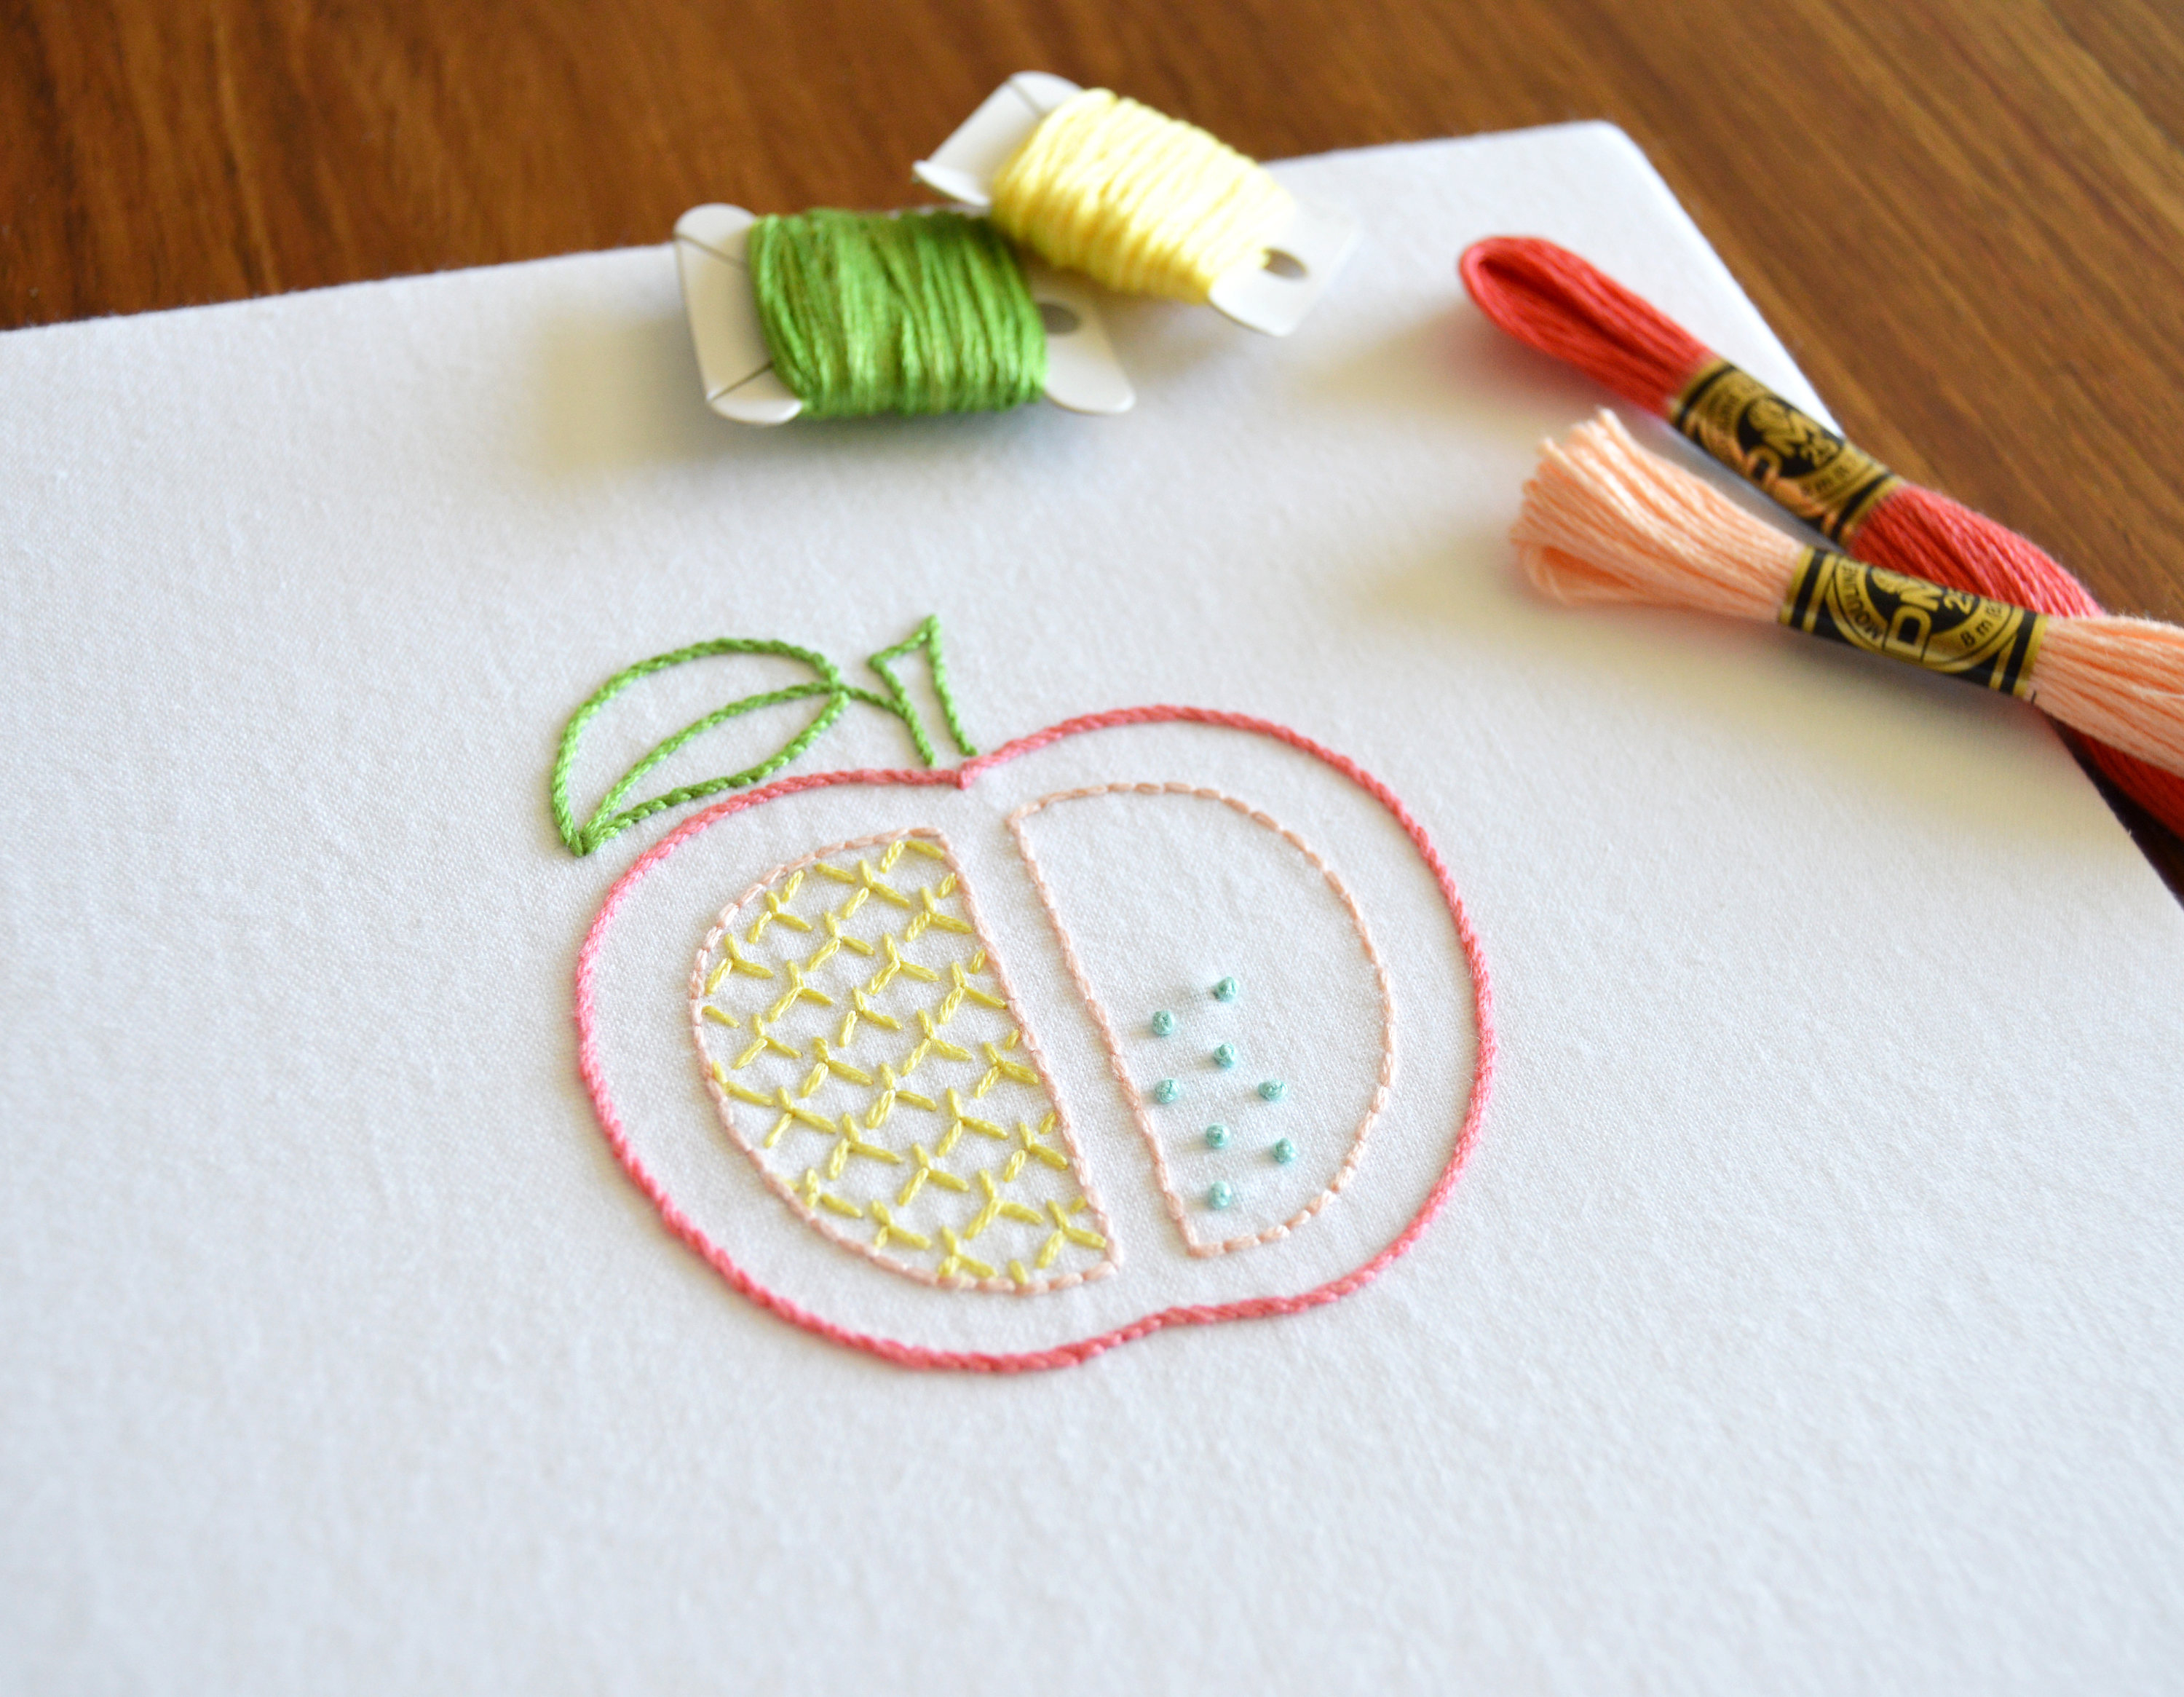 Modern Hand Embroidery Patterns Apple Slice Hand Embroidery Pattern Modern Embroidery Fruit Design Embroidery Patterns Embroidery Pdf Pdf Pattern